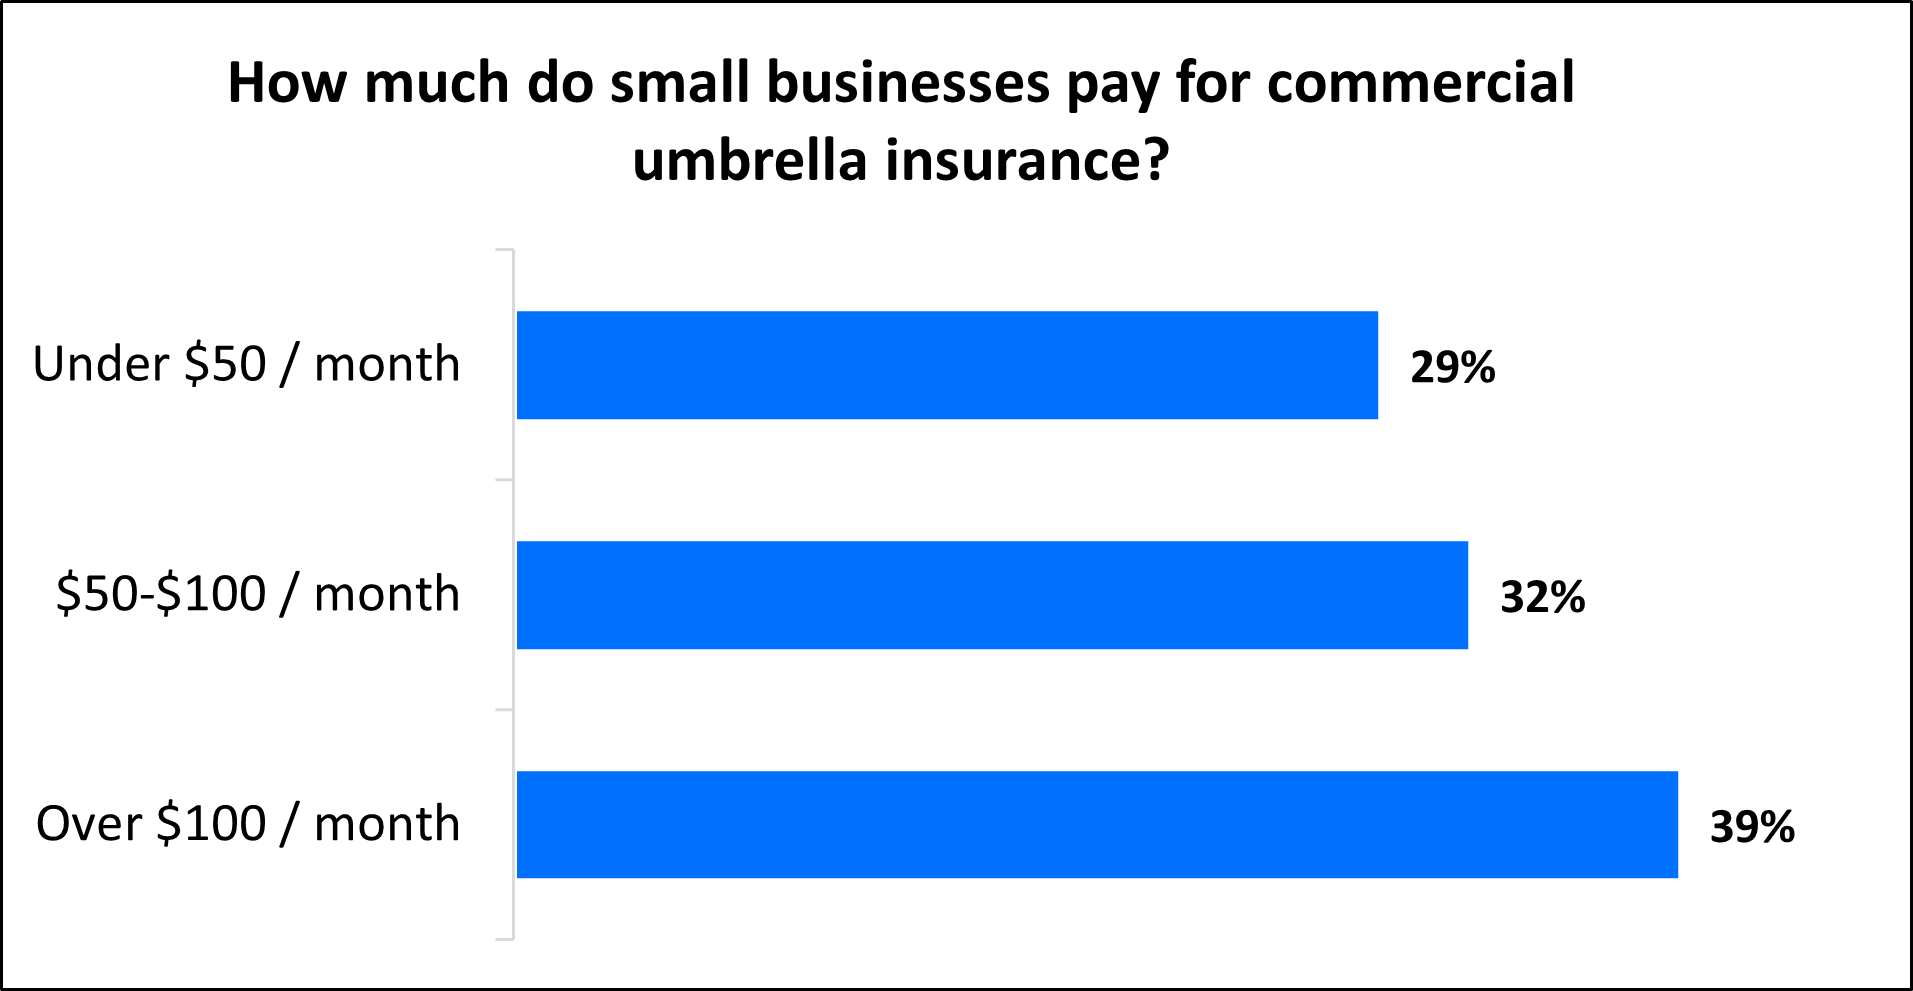 How much do small businesses pay for commercial umbrella insurance?